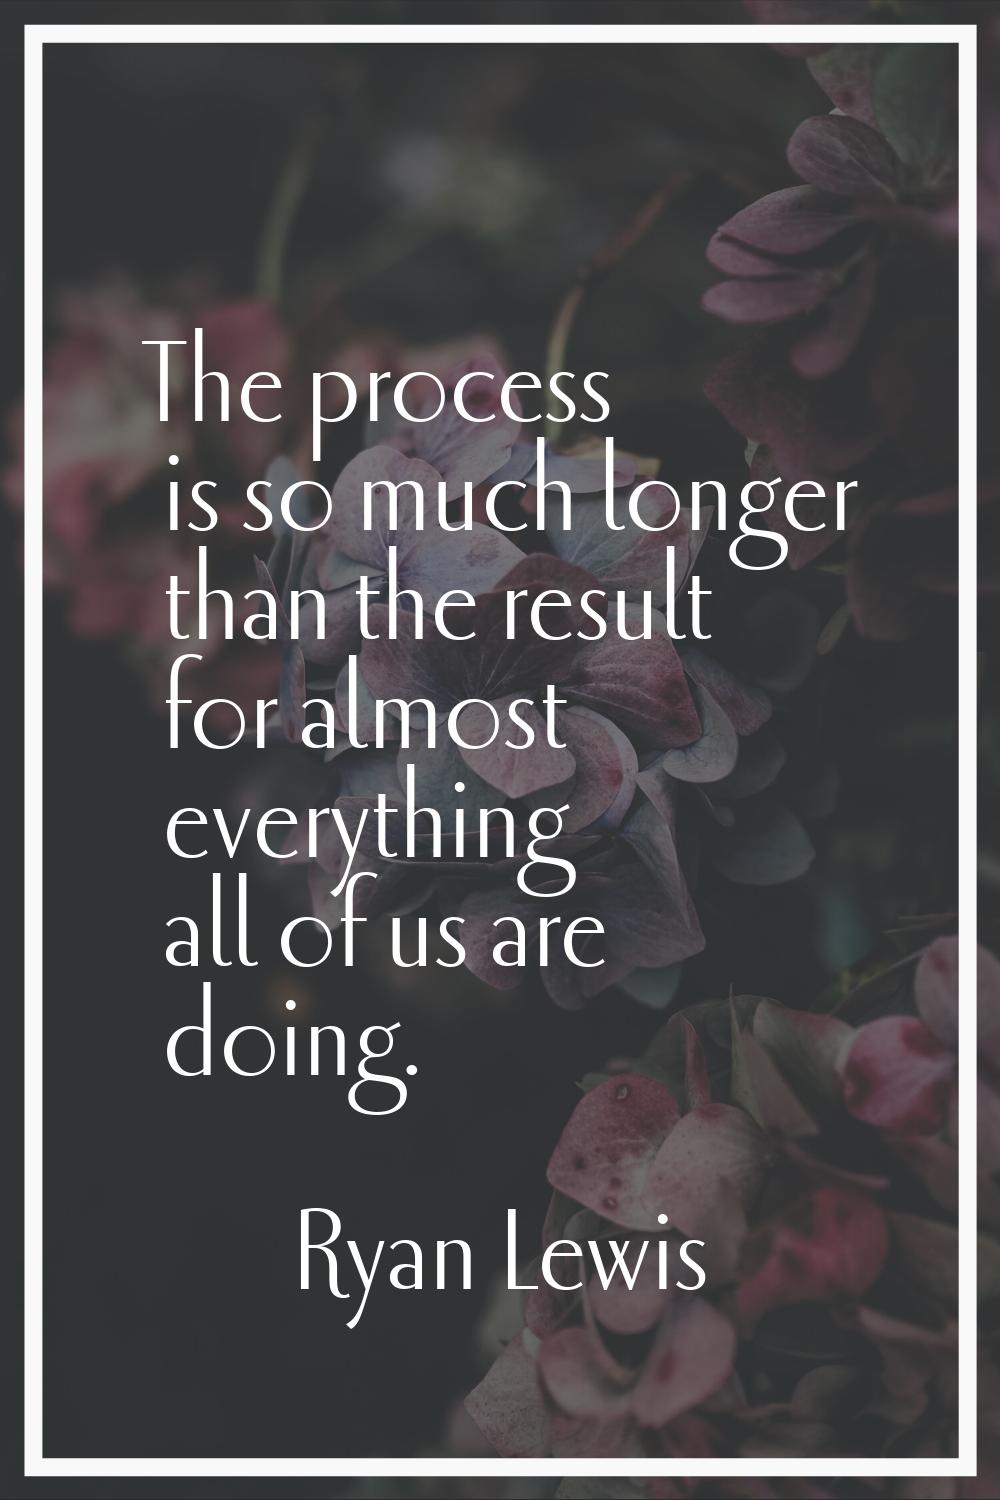 The process is so much longer than the result for almost everything all of us are doing.